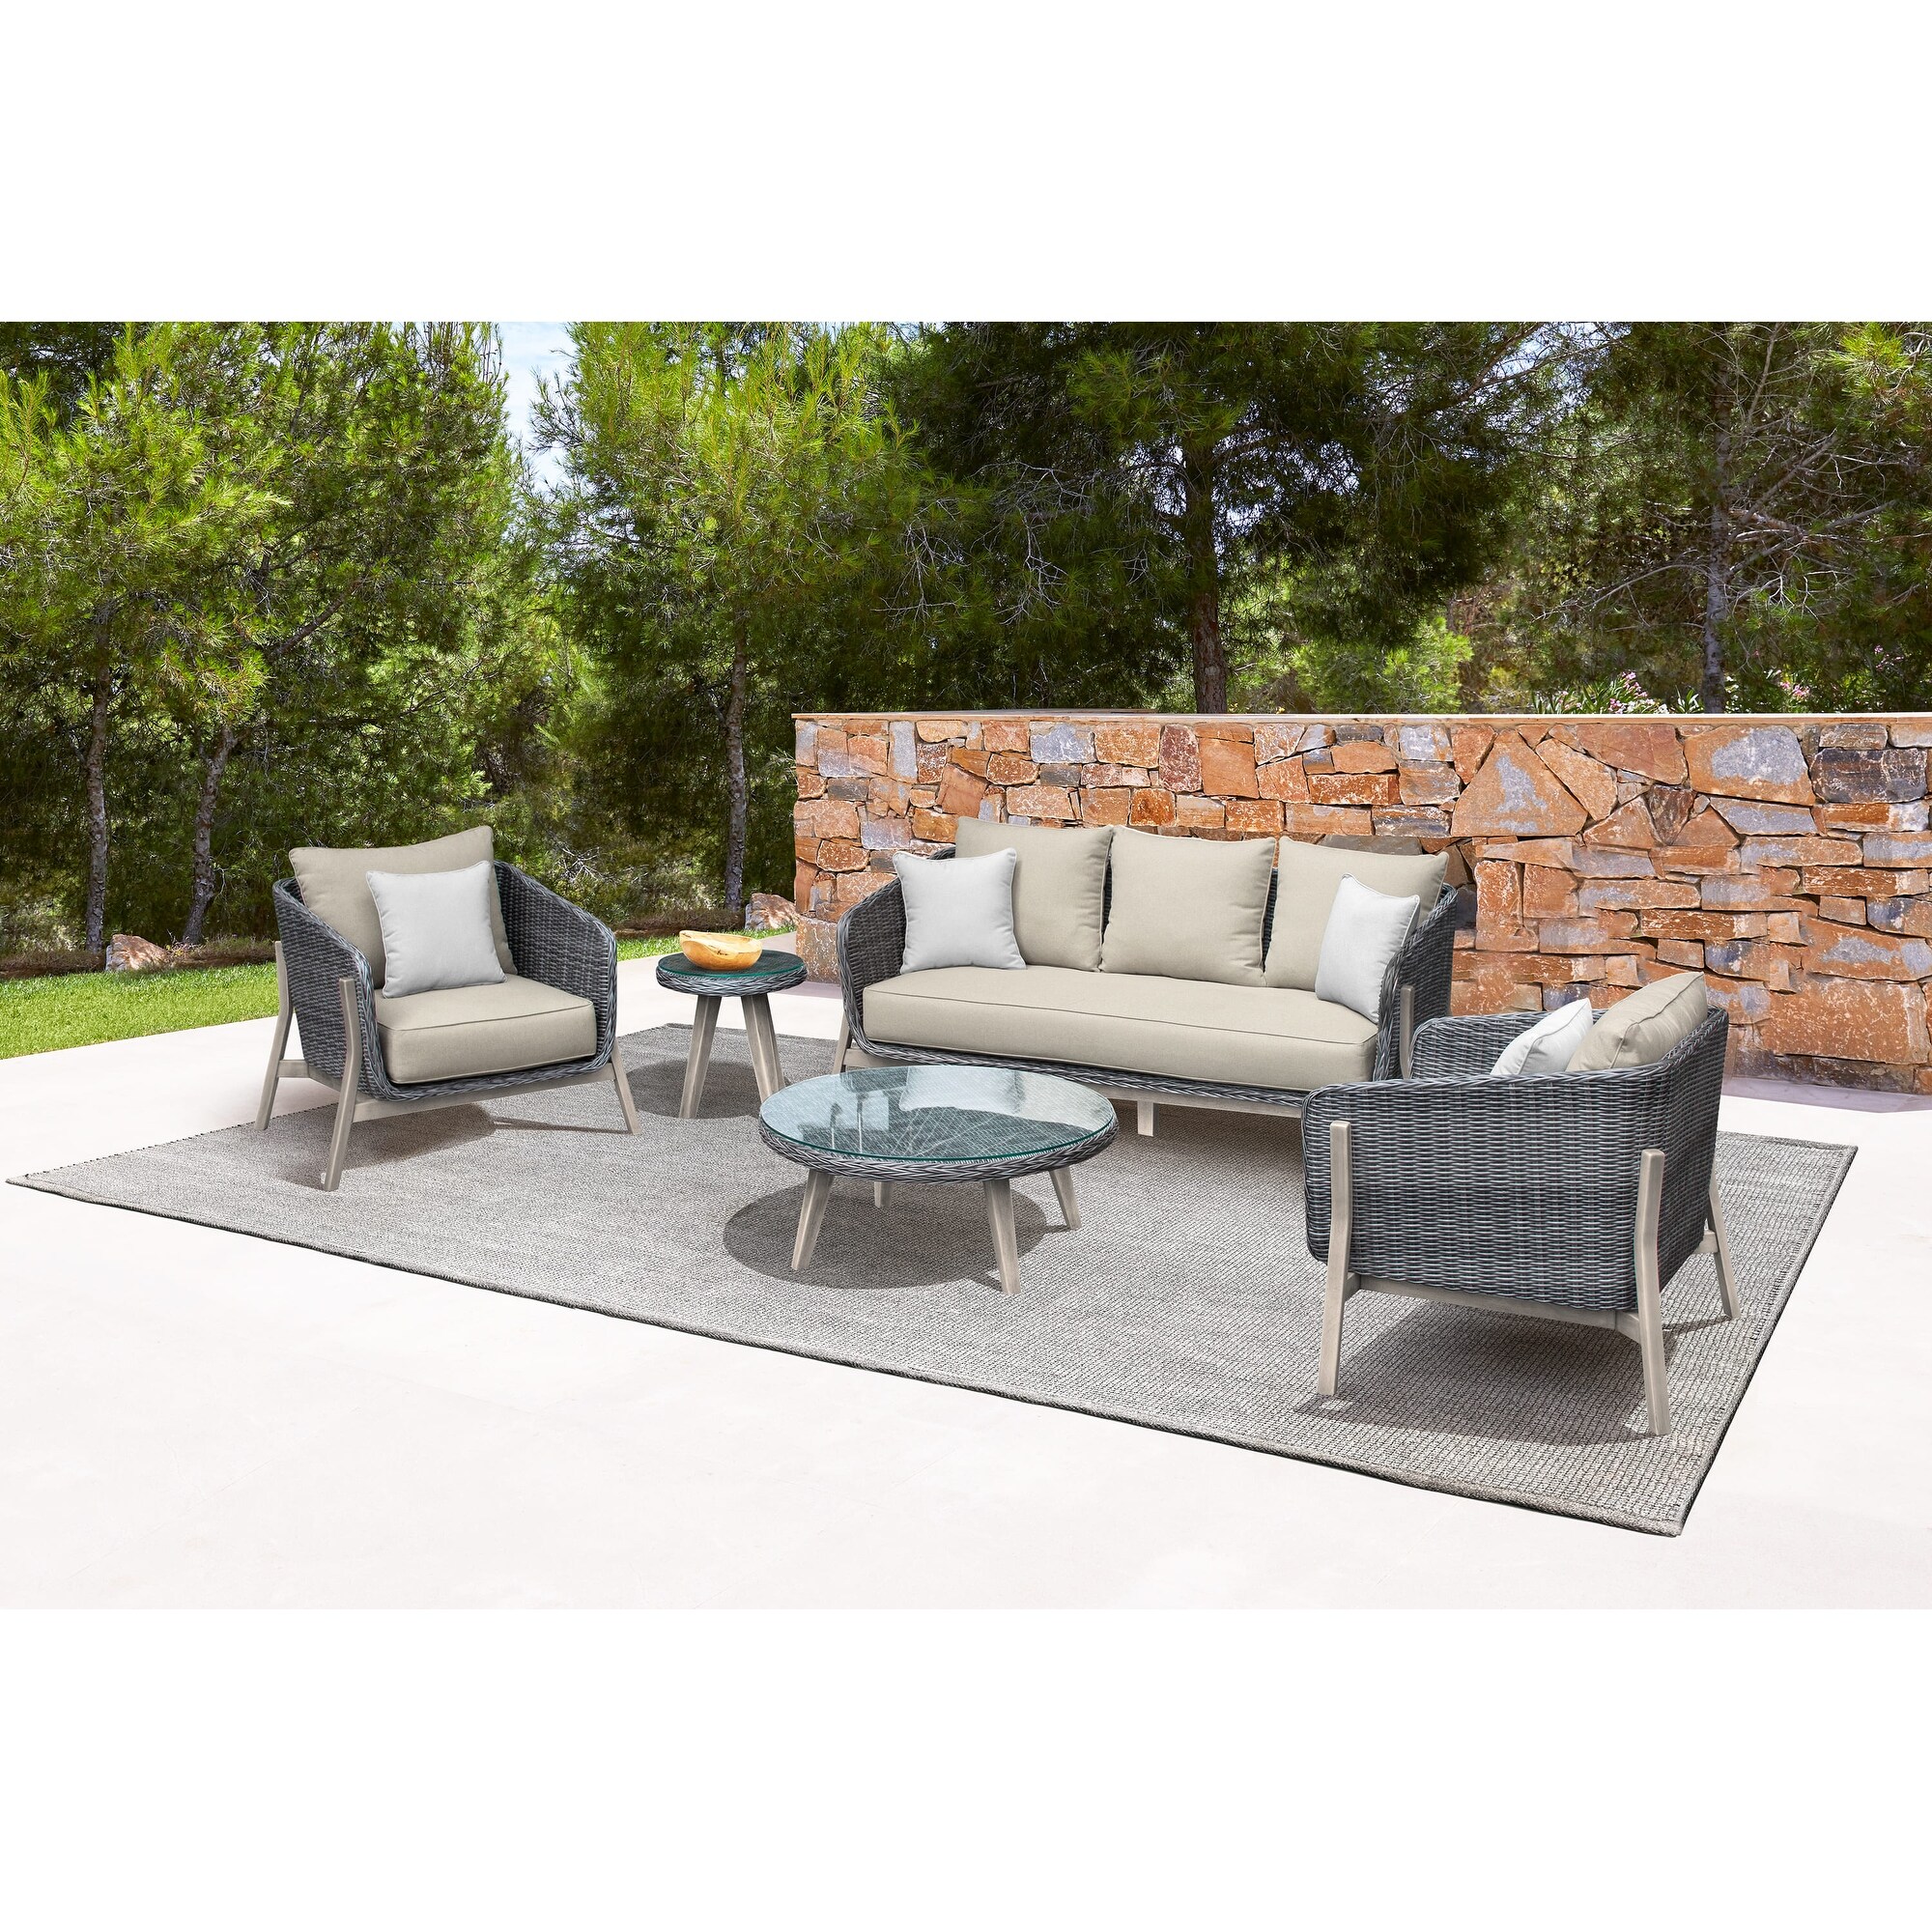 Pismo 4 Piece Outdoor Patio Furniture Set In Acacia Wood And Wicker With Taupe Cushions